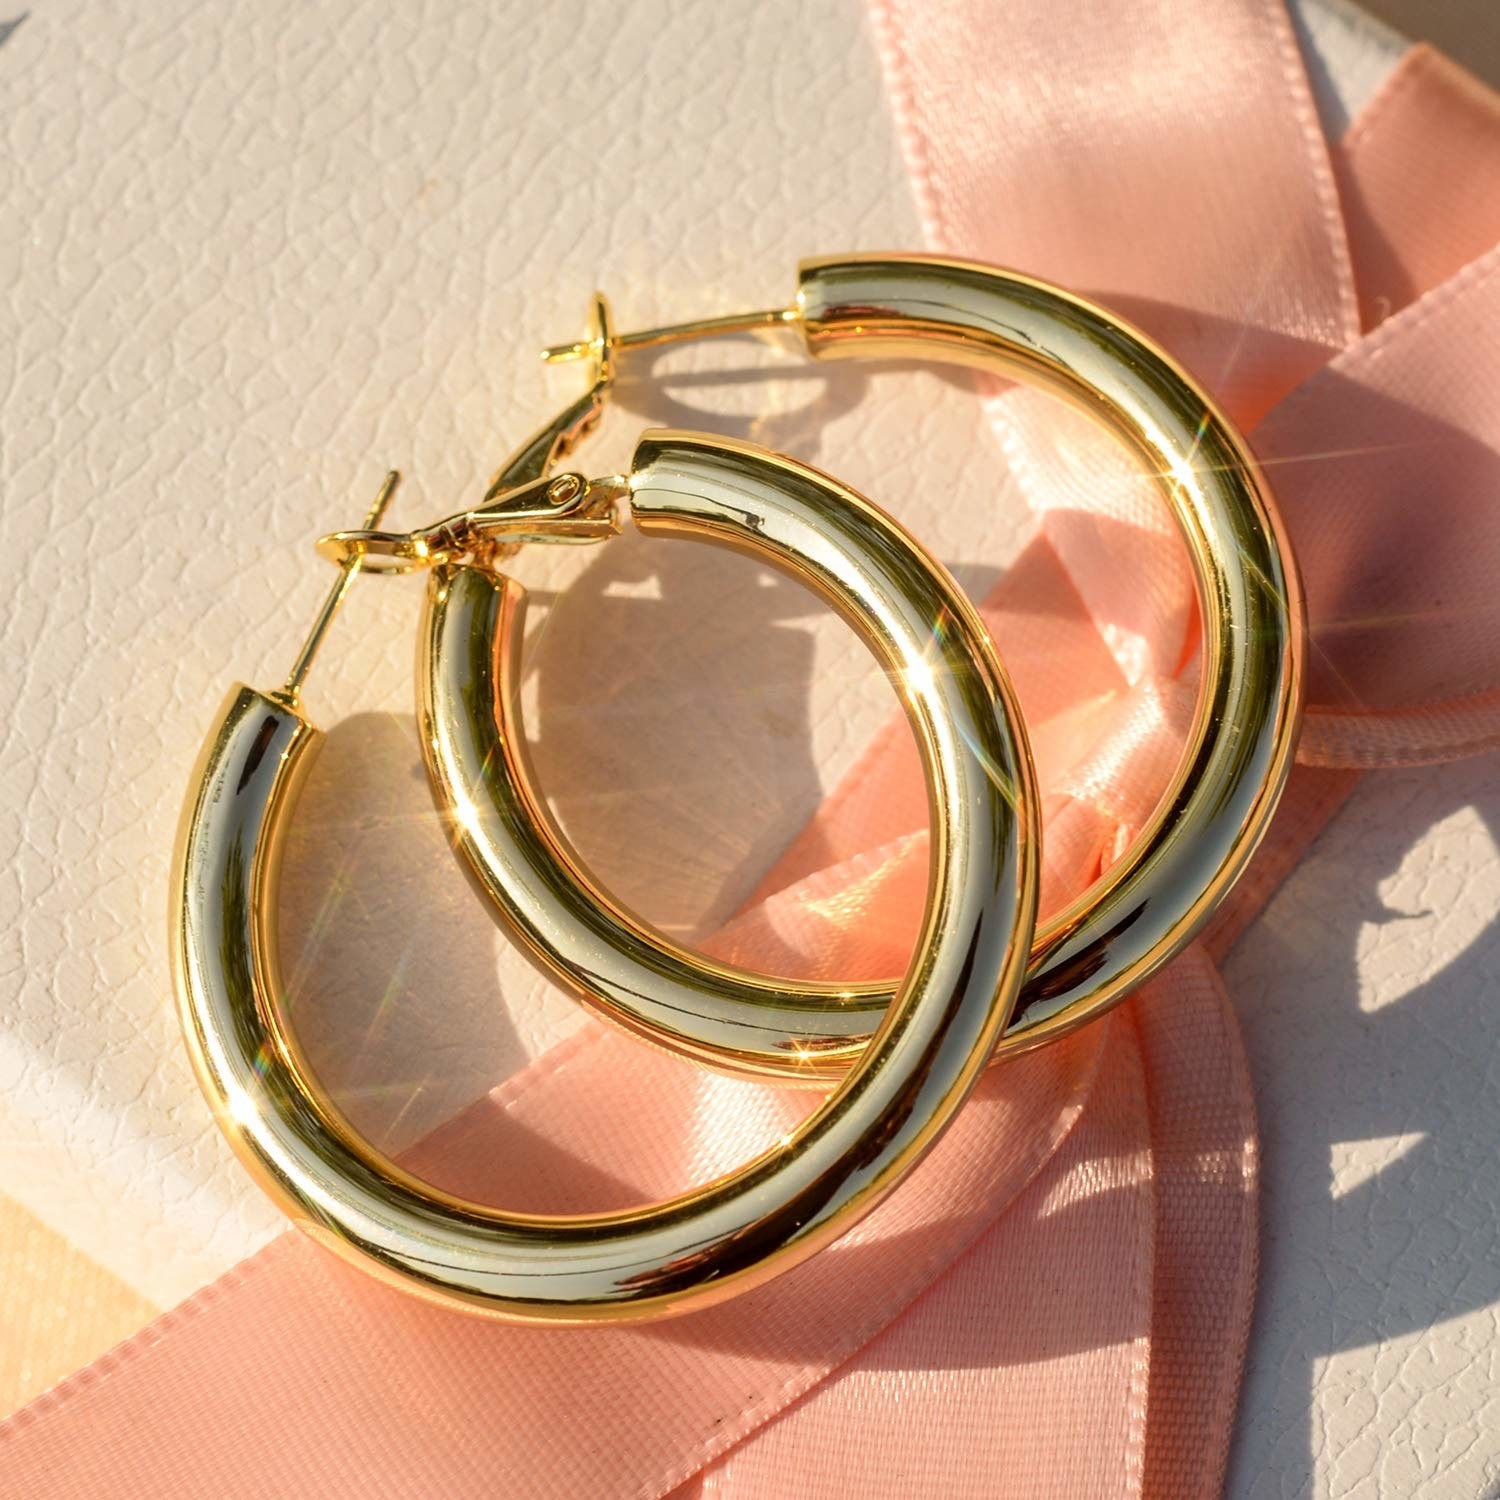 The gold hoops